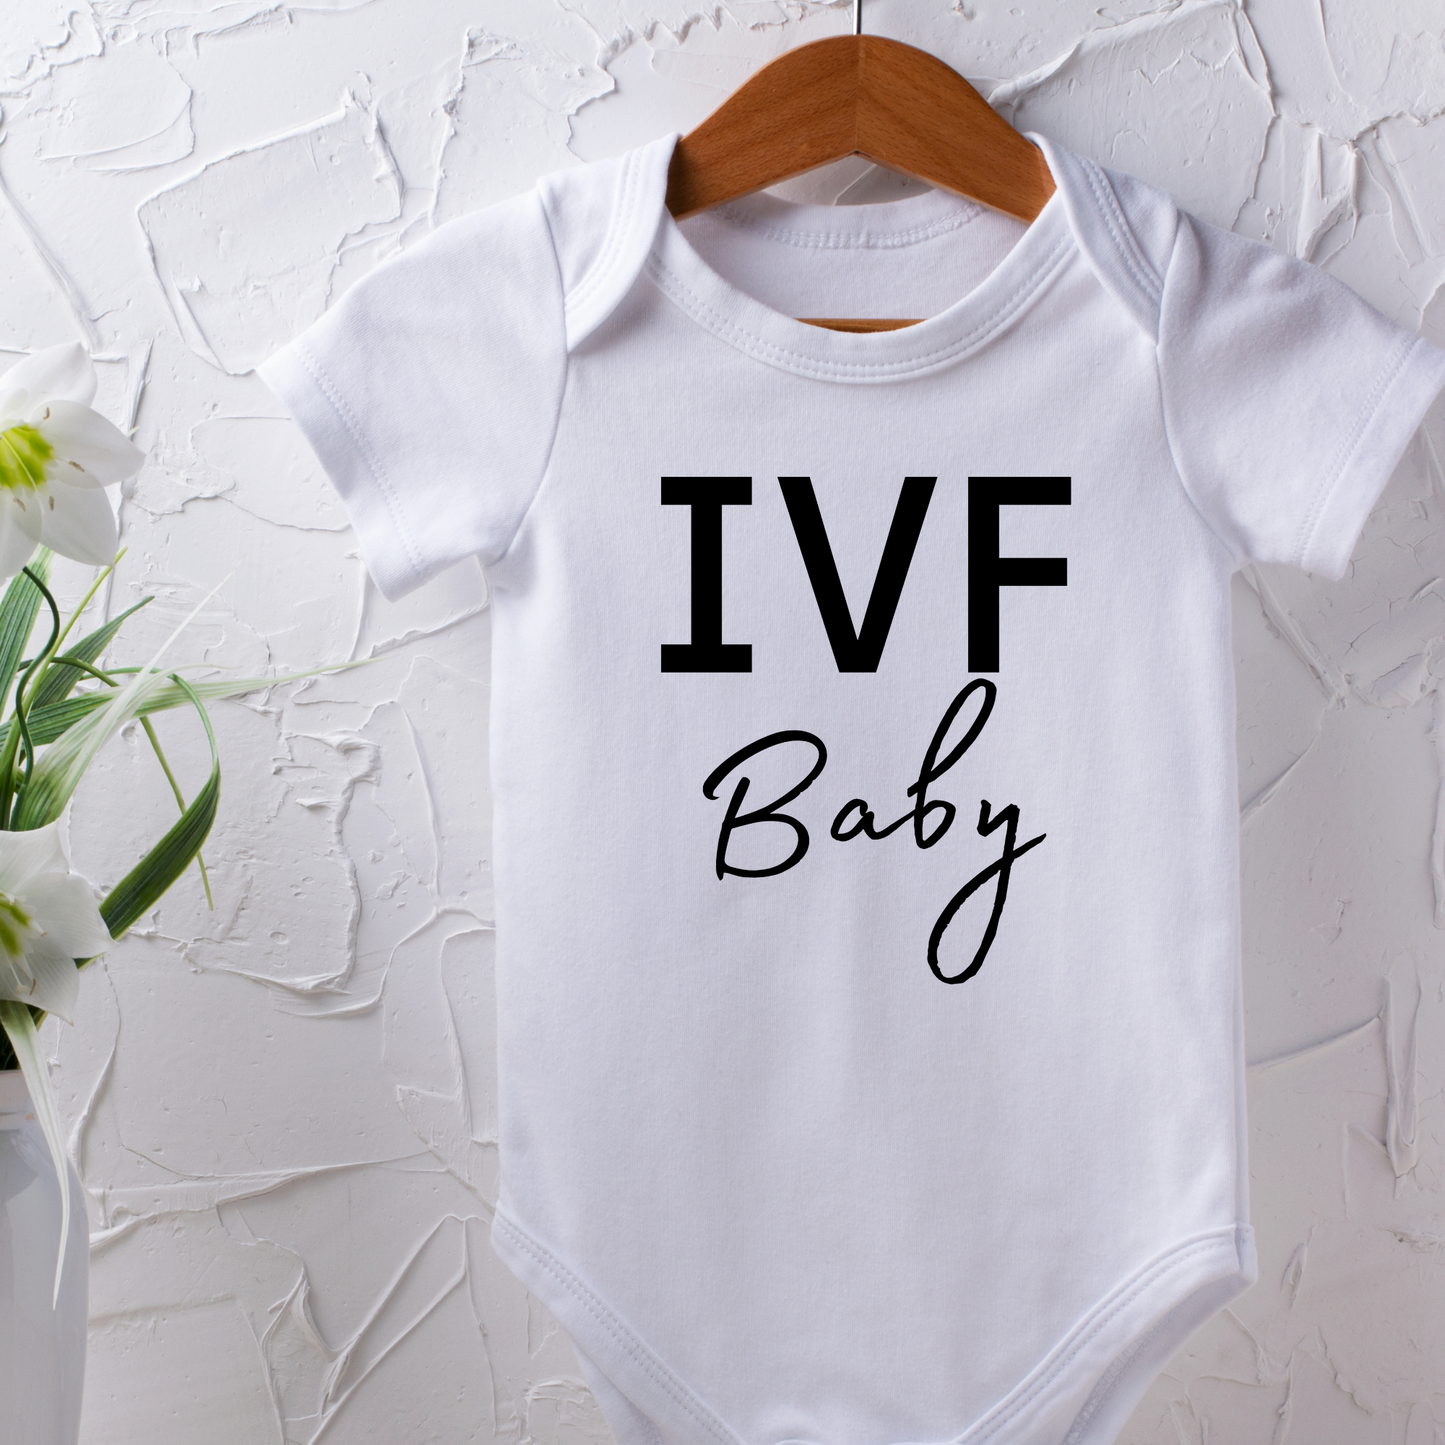 Cute Onesie for Baby, little me newborn and baby clothes, toddler clothing, funny shirt, funny baby outfit, newborn babies, personalized baby outfit, personalized onesie, baby bodysuit, pregnancy announcement, babyshower announcement, social media pregnancy announcement, miracle baby outfit